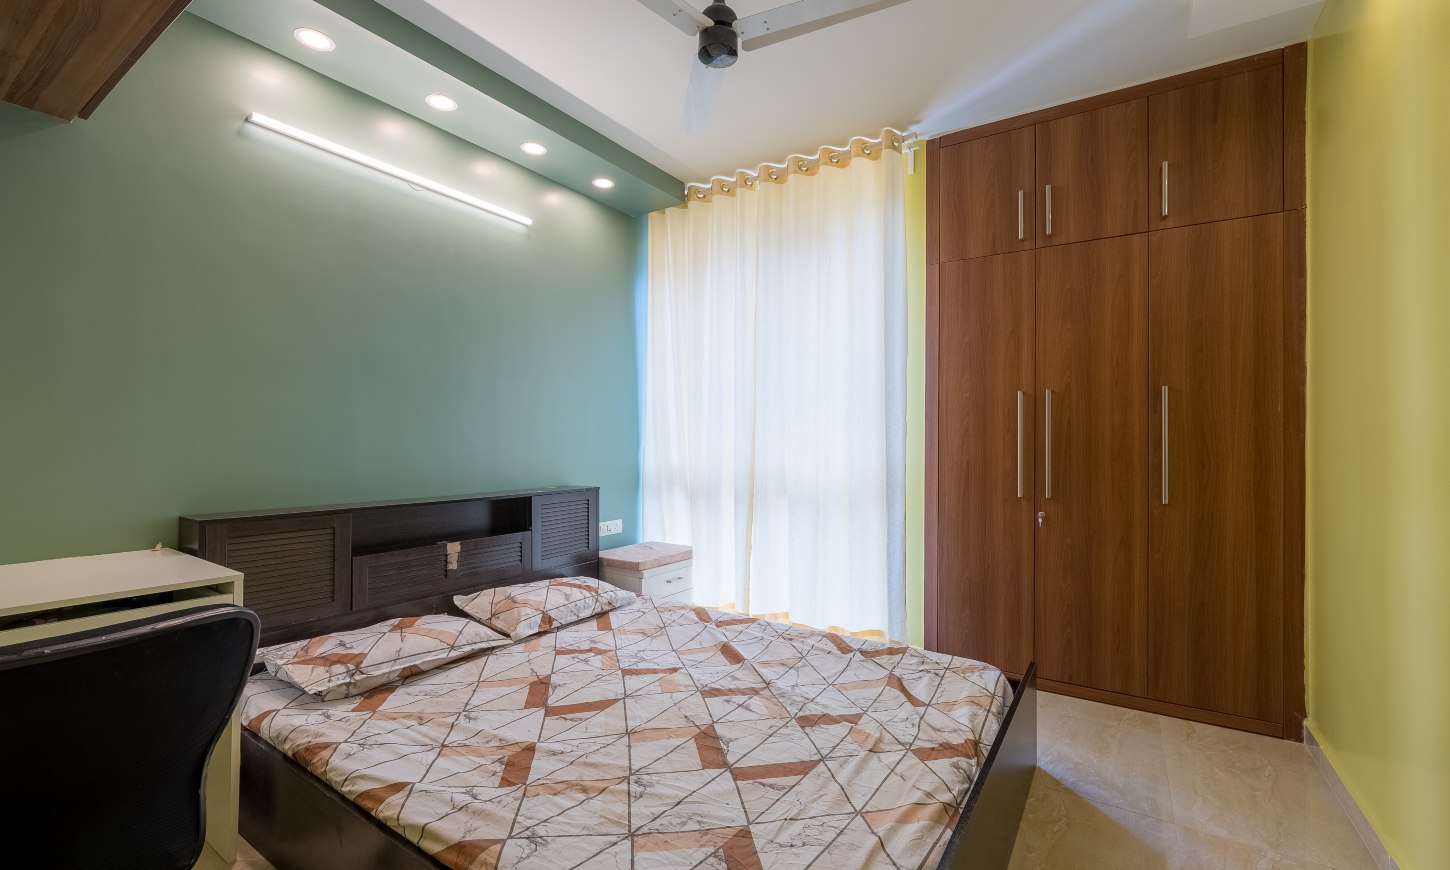 Minimalist bedroom with loft and floor-to-ceiling wardrobe designed for 2 bhk apartment at Sarjapur Road